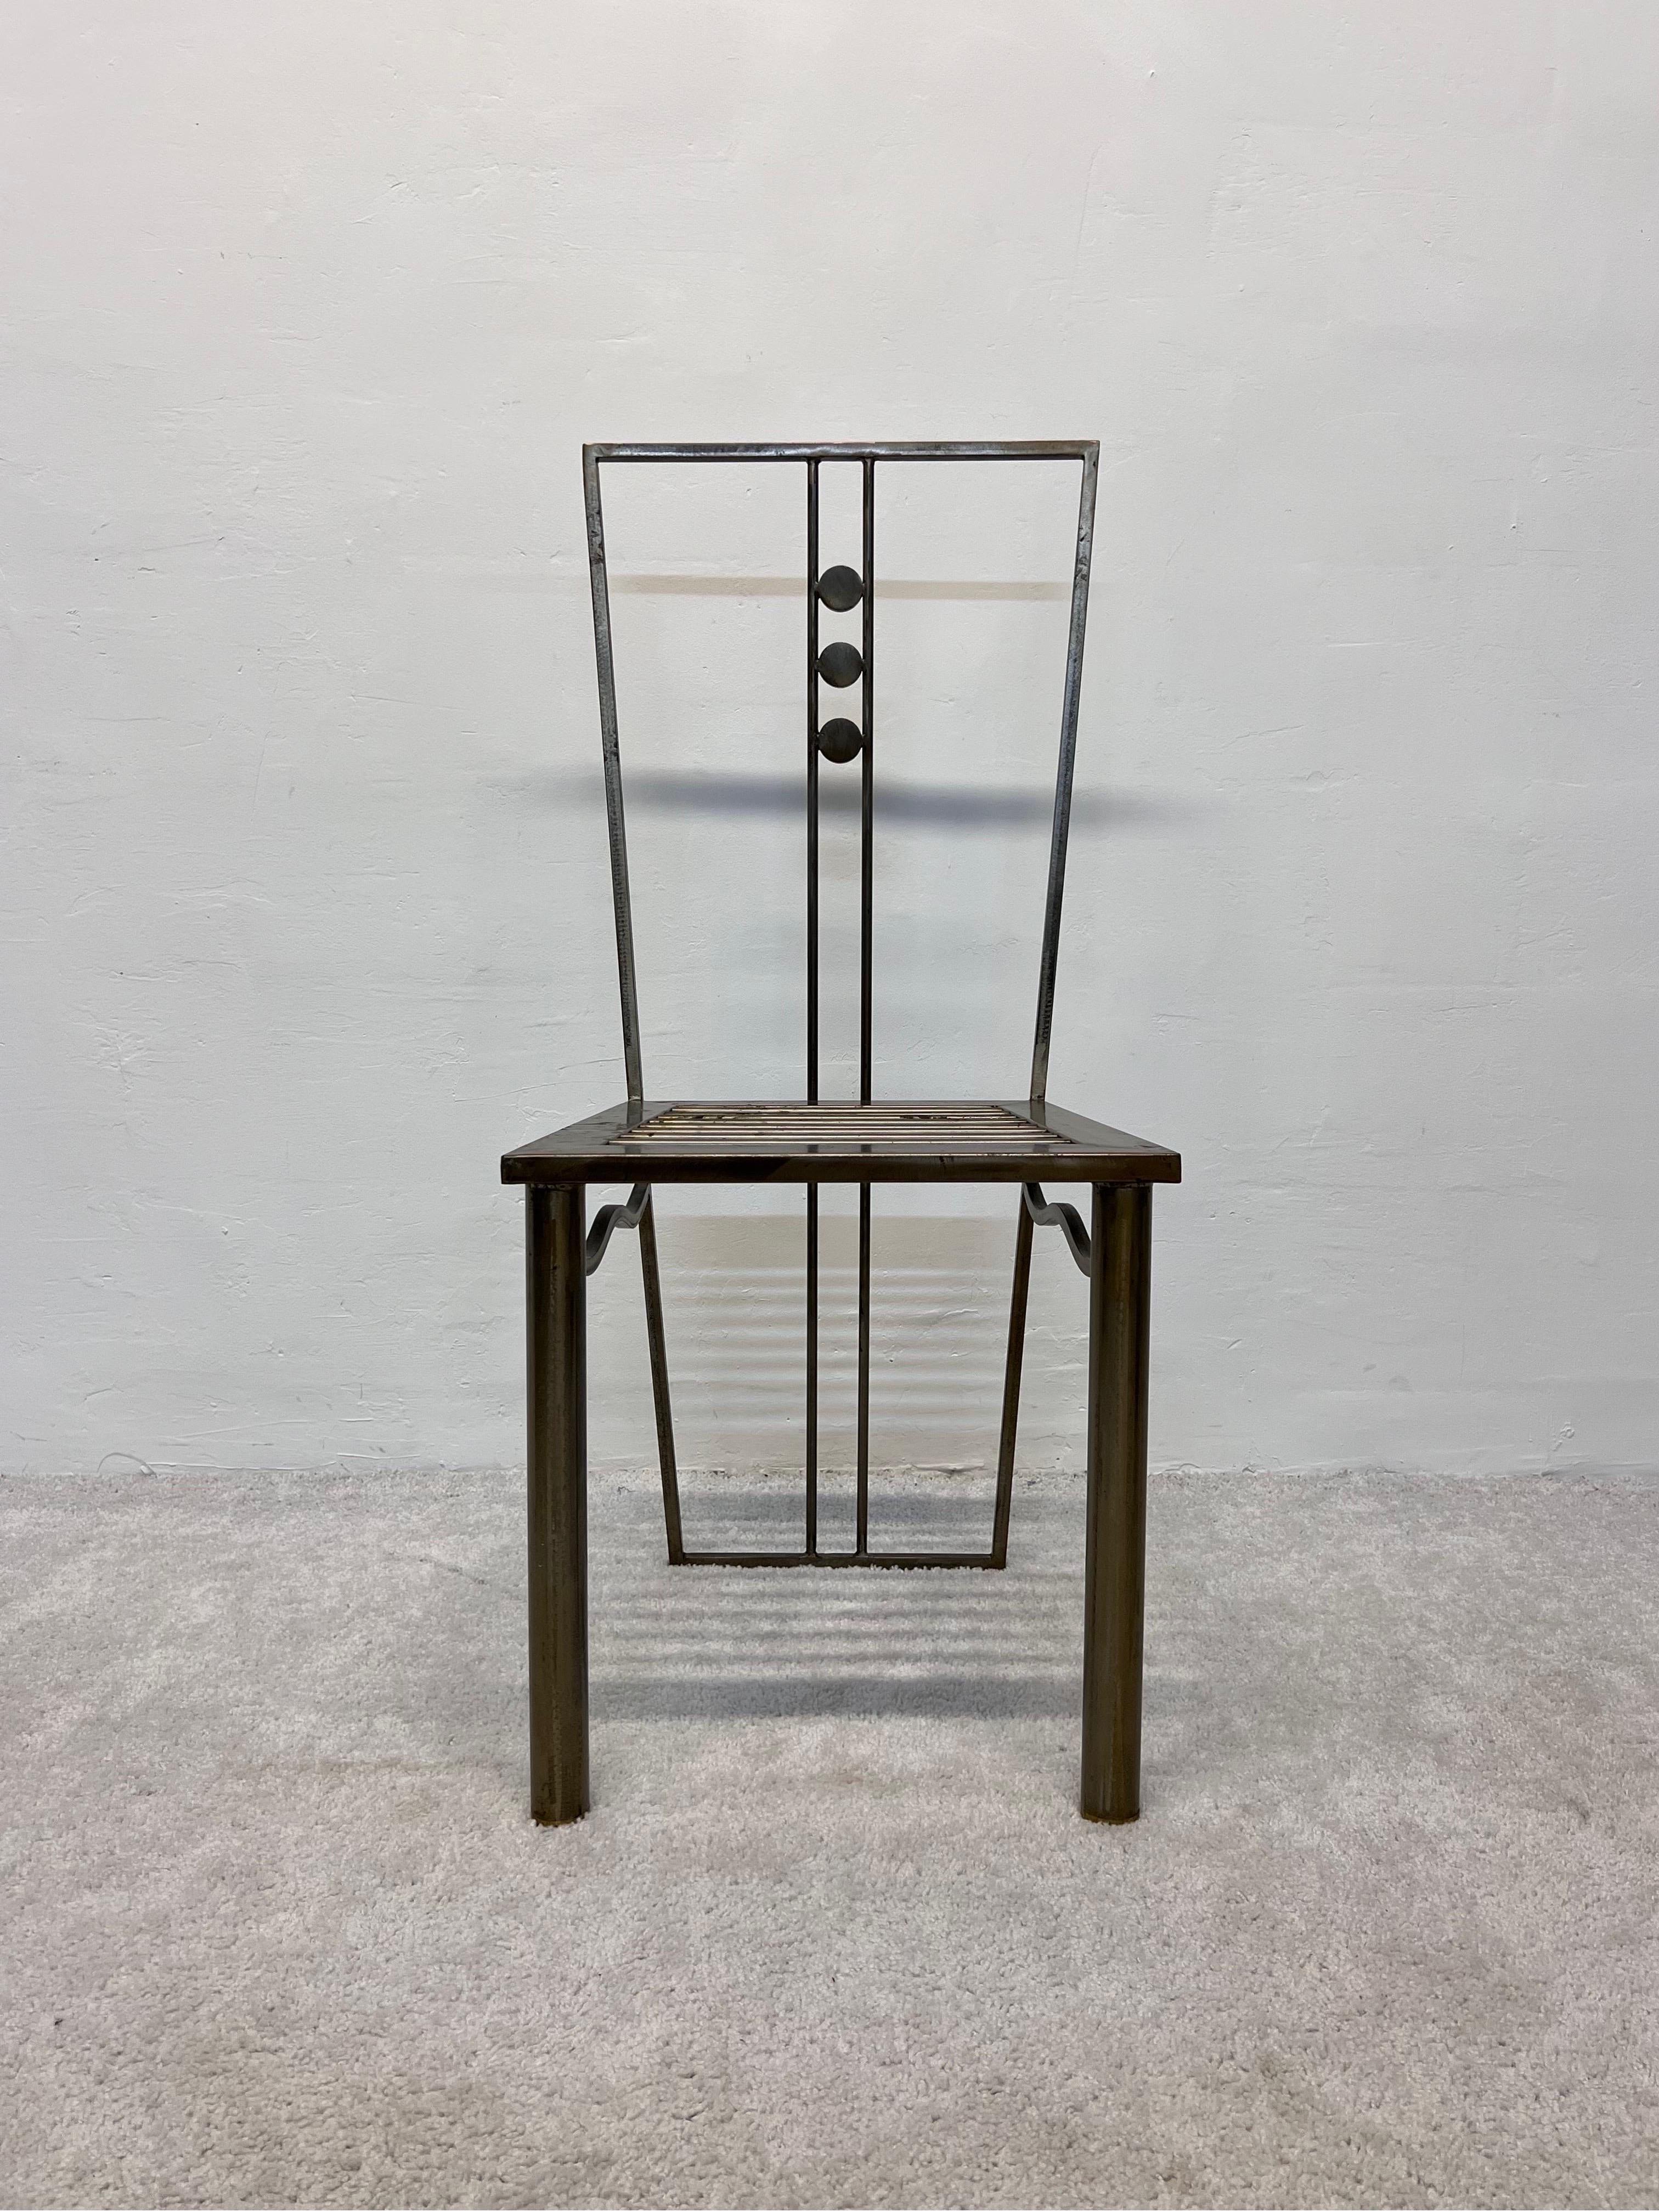 Postmodern Sculptural Studio Crafted Steel Dining or Side Chair, 1990s For Sale 7